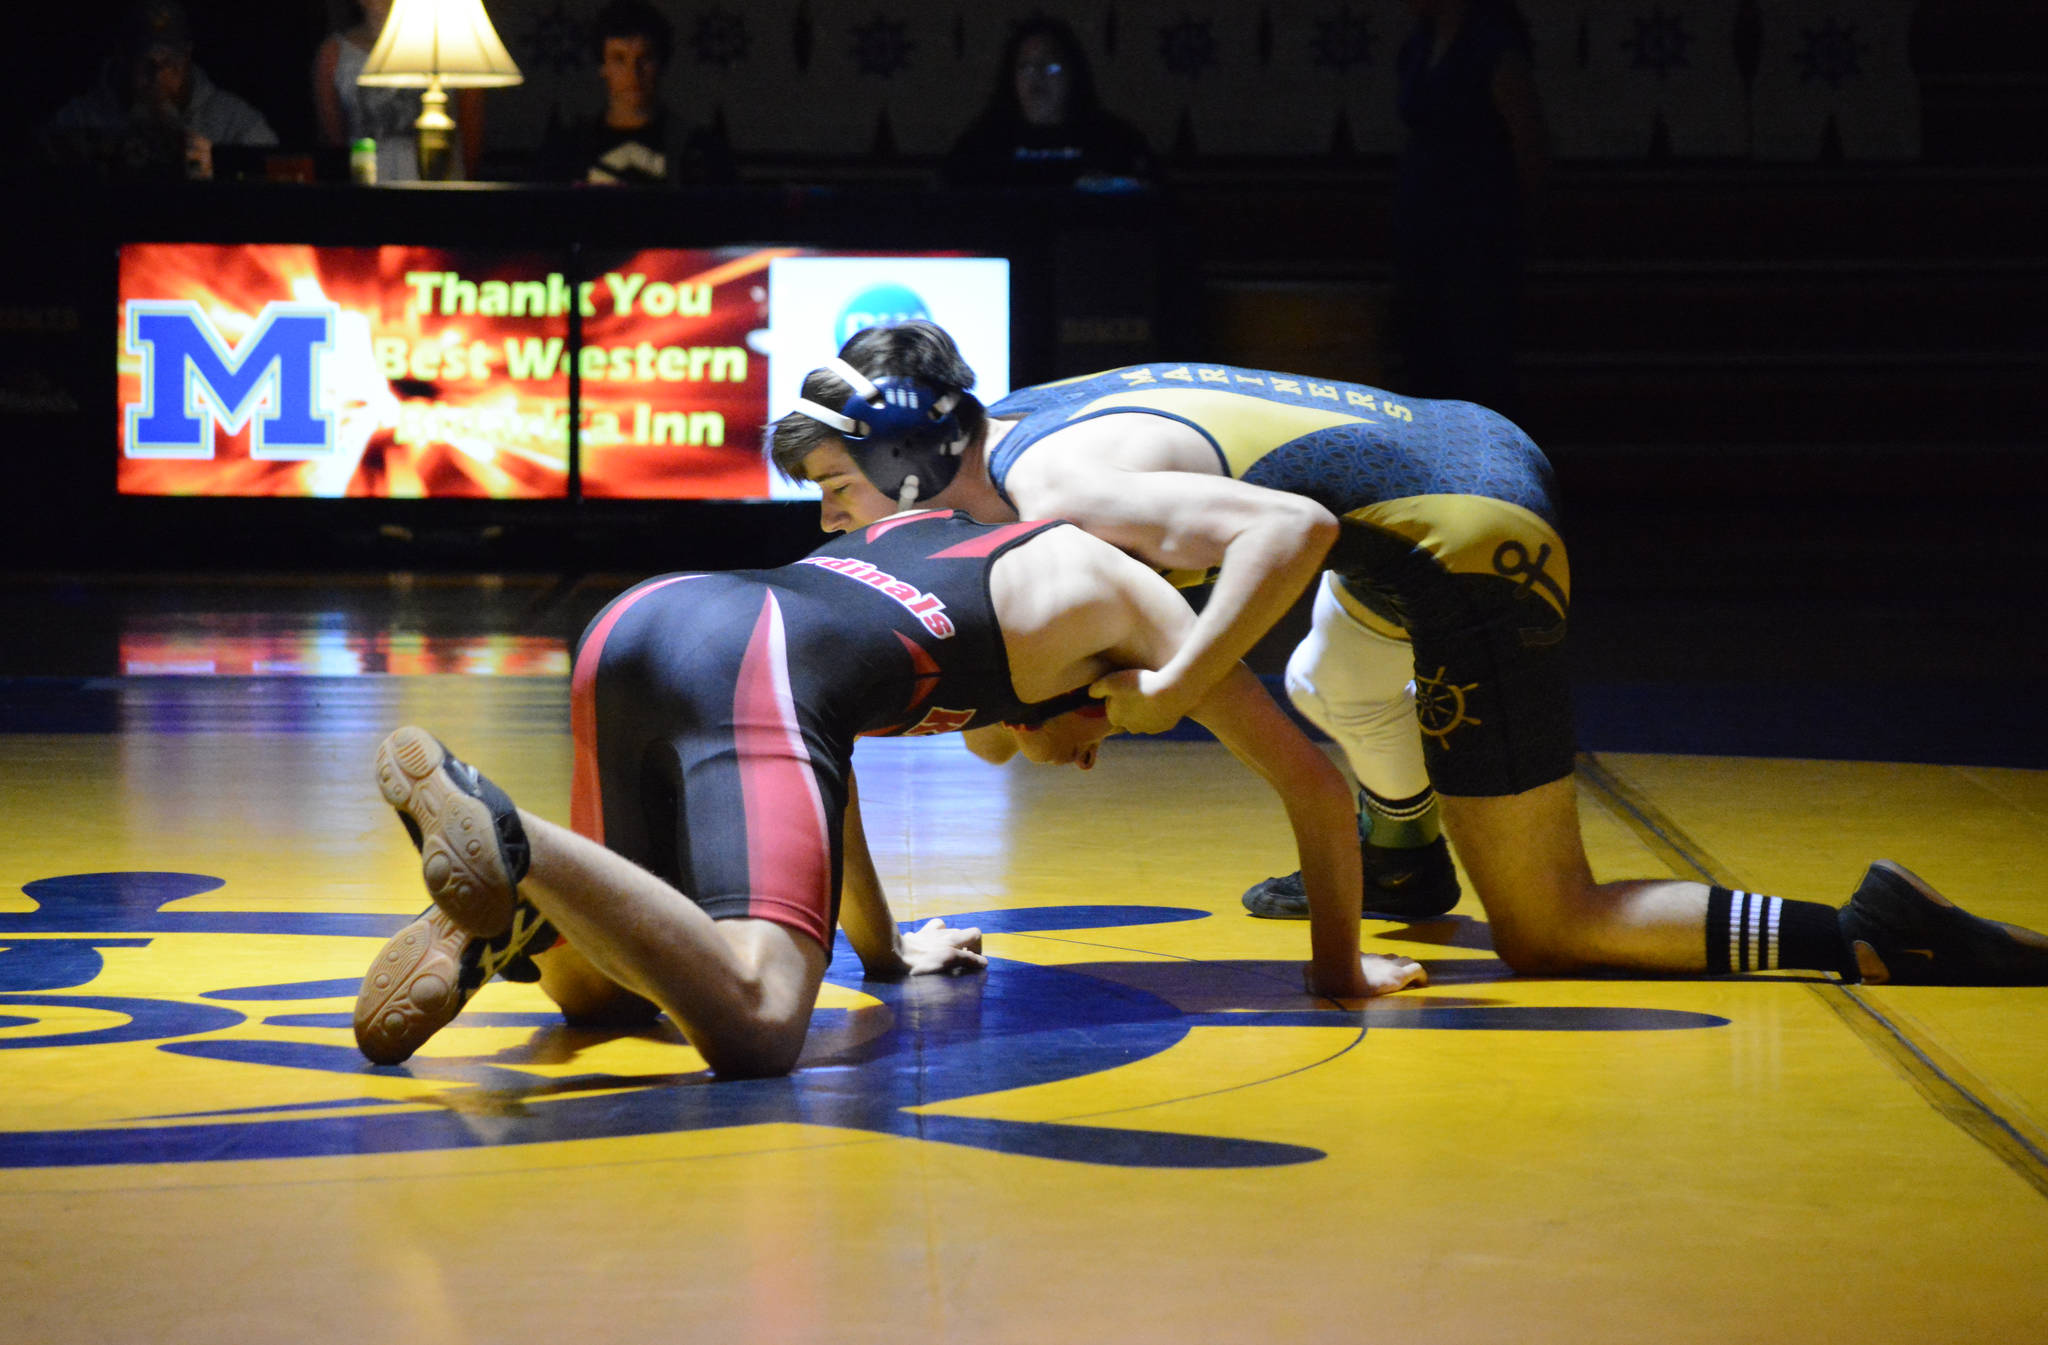 Homer High School Mariner Seth Inama, right, wrestles with Kenai High School Kardinal Daemon Duniphin, left, in a meet held Wednesday, Nov. 21, 2018, at the Homer High School Alice Witte Gym in Homer, Alaska. (Photo by Michael Armstrong/Homer News)